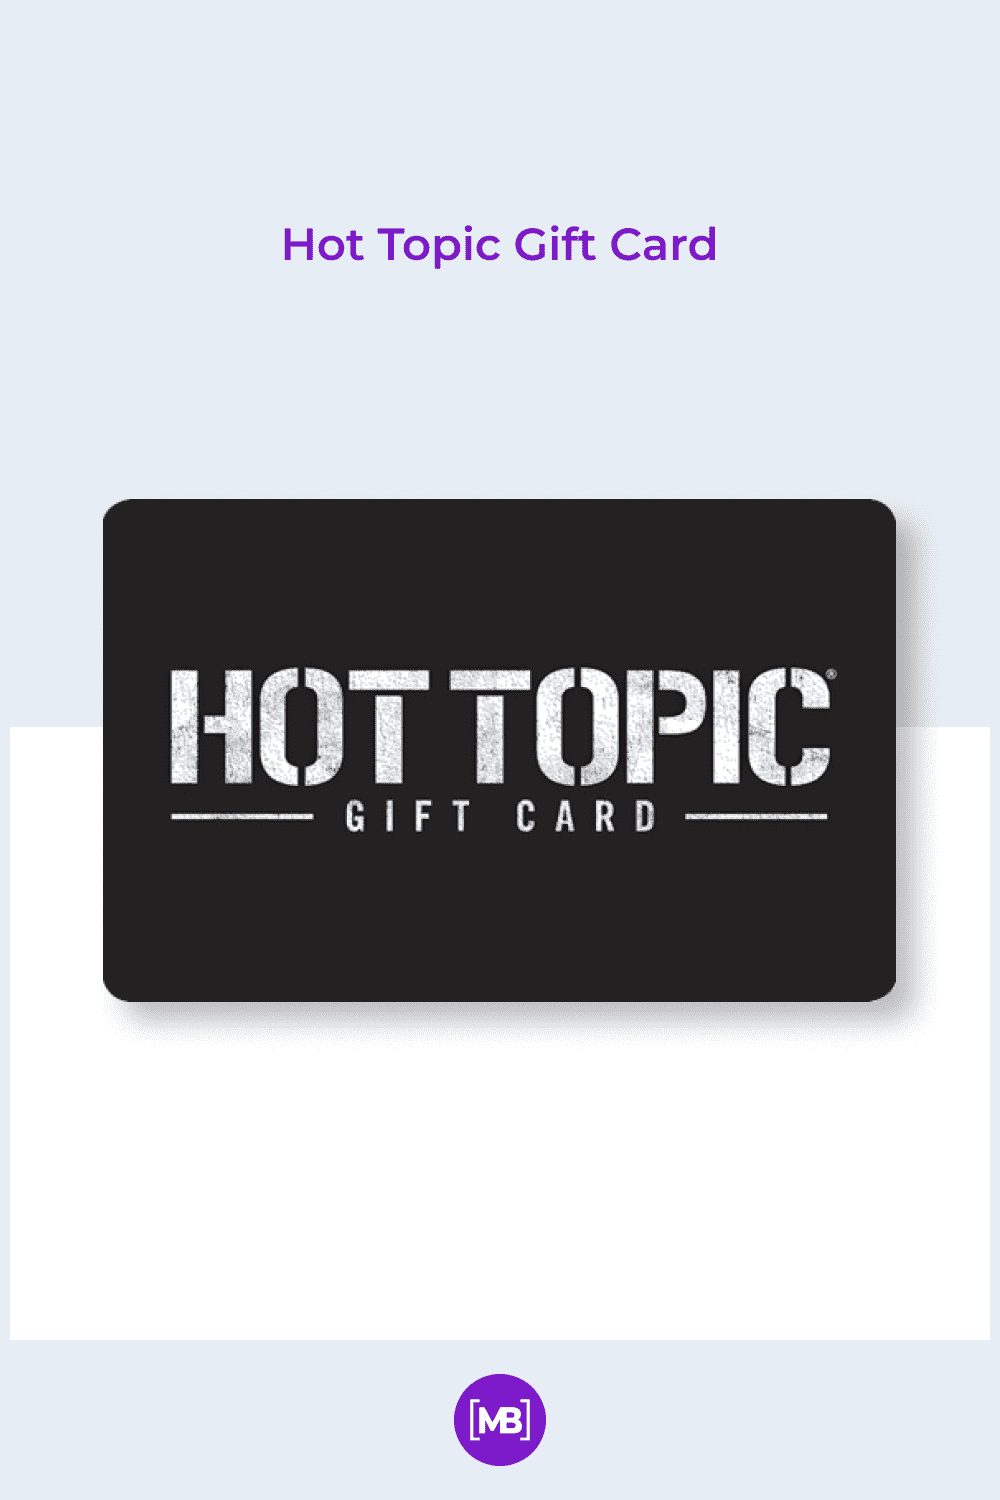 A gift card for branded merch from your favorite movies and comics.